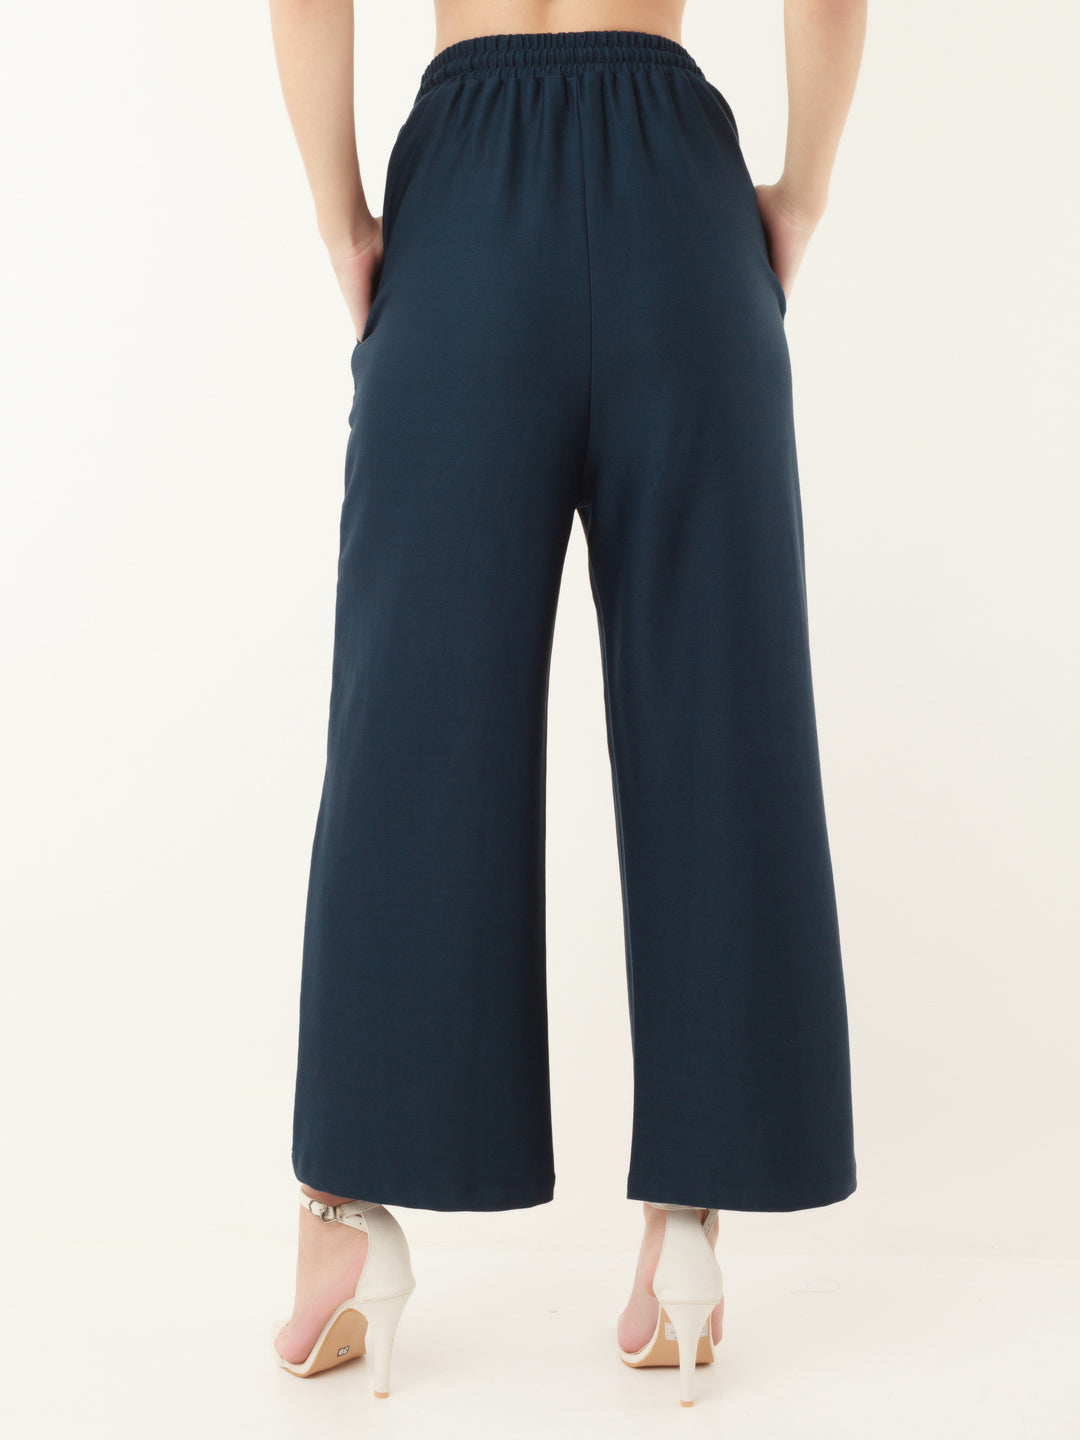 Blue Solid Elasticated Trouser For Women